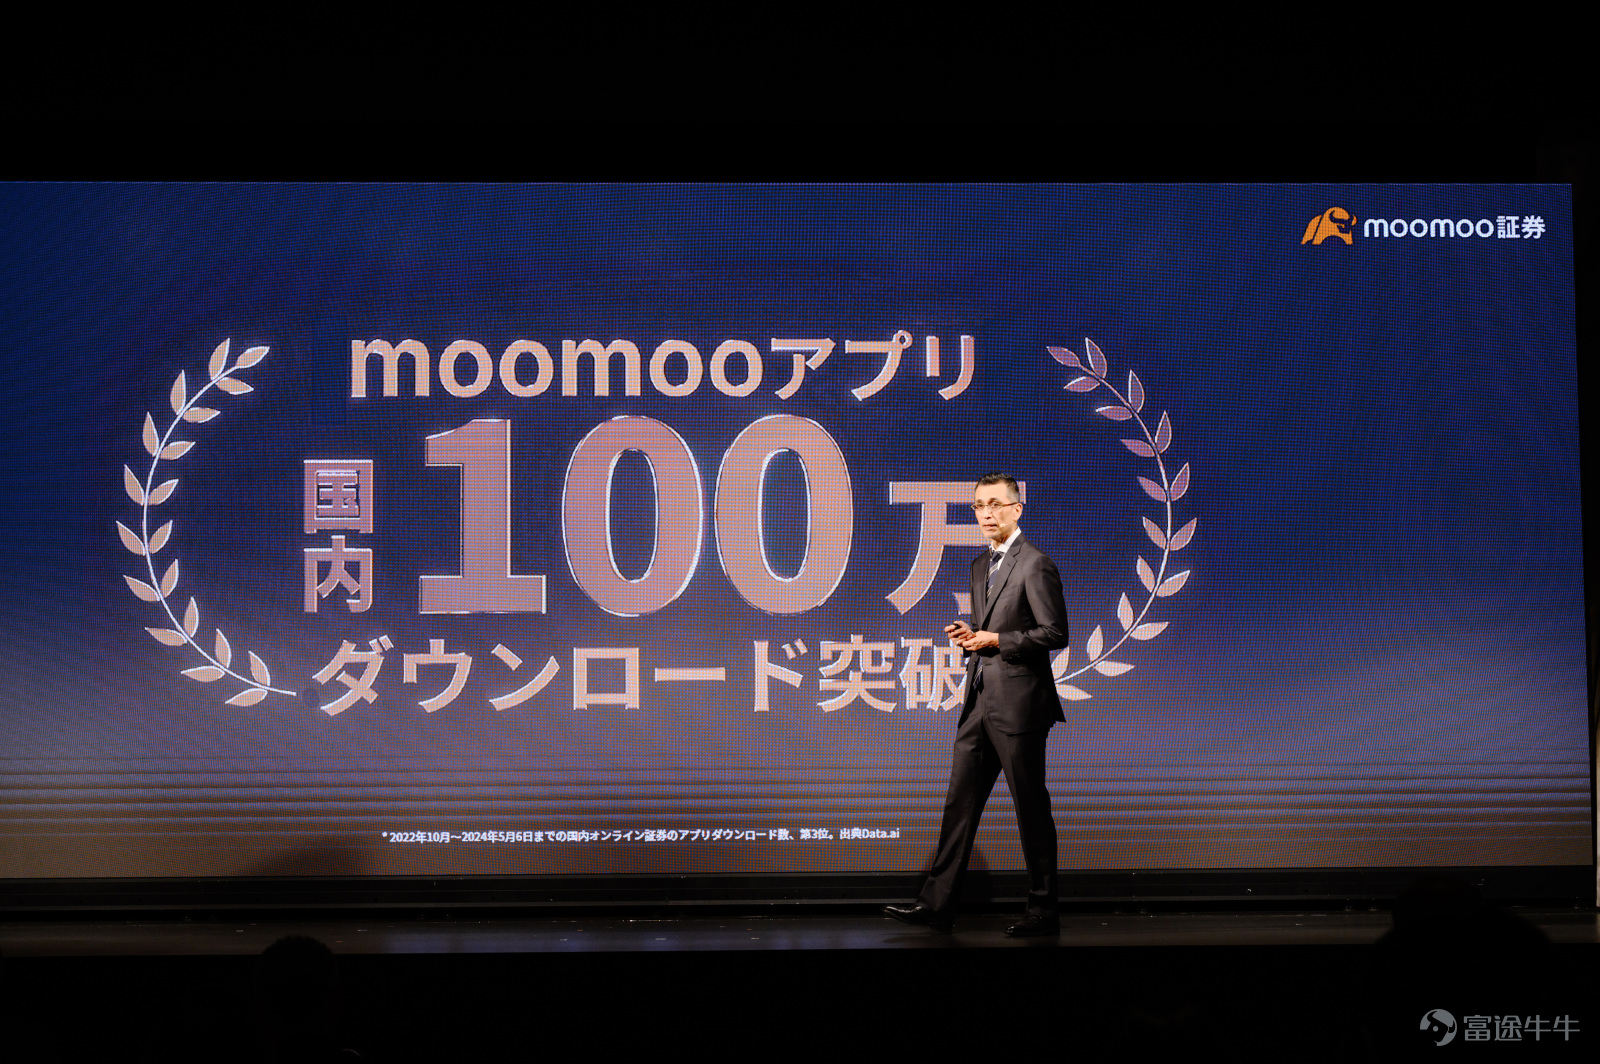 Francisco Izawa, President of Moomoo Japan shared the news that the app has hit 1 million downloads